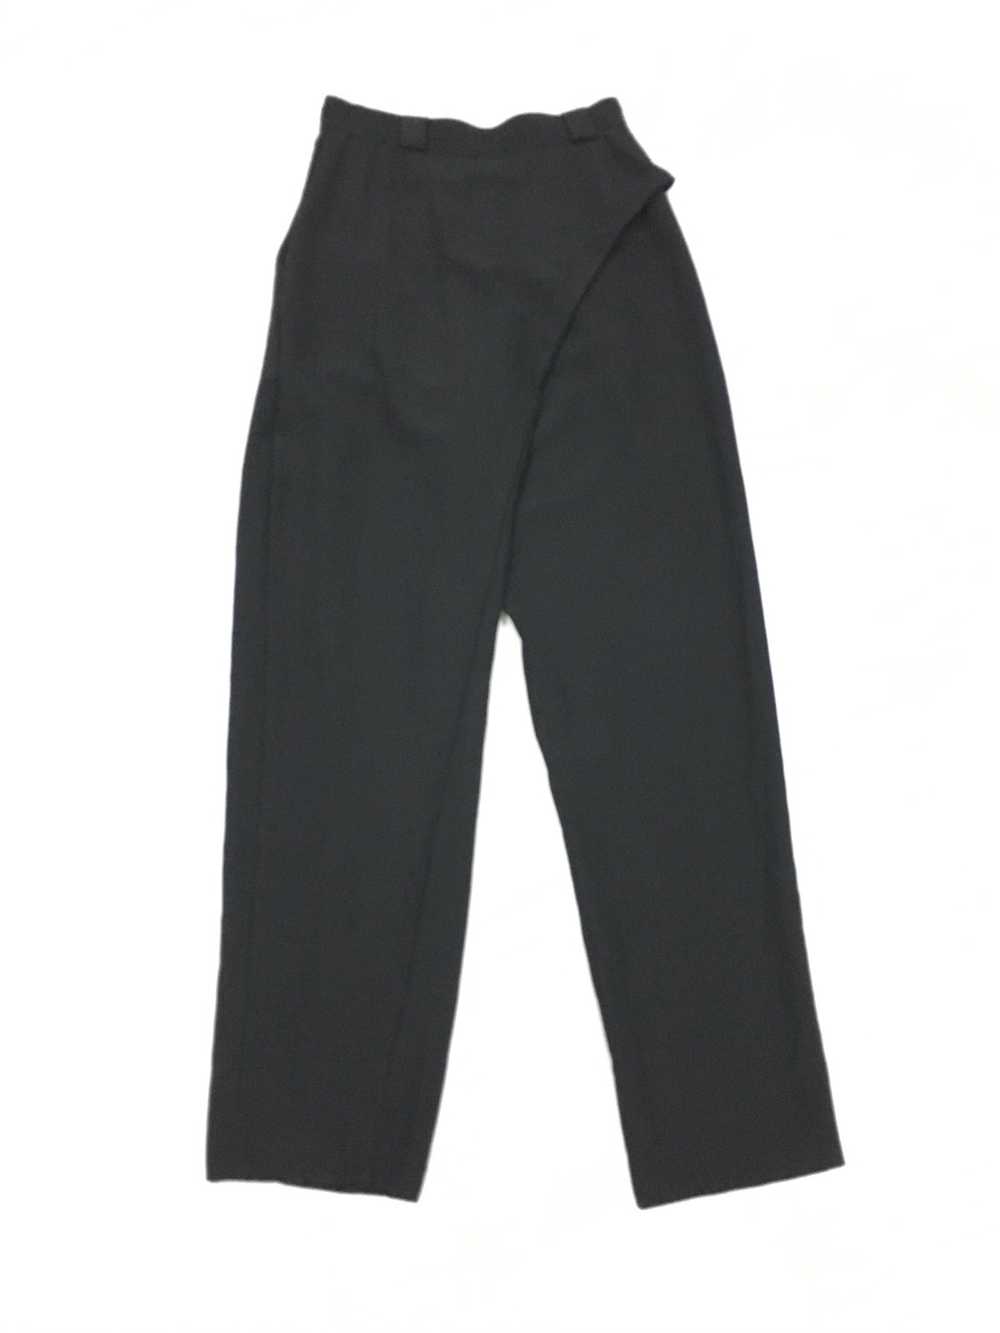 Versace Archive Assymetrical Wool Pants - image 5